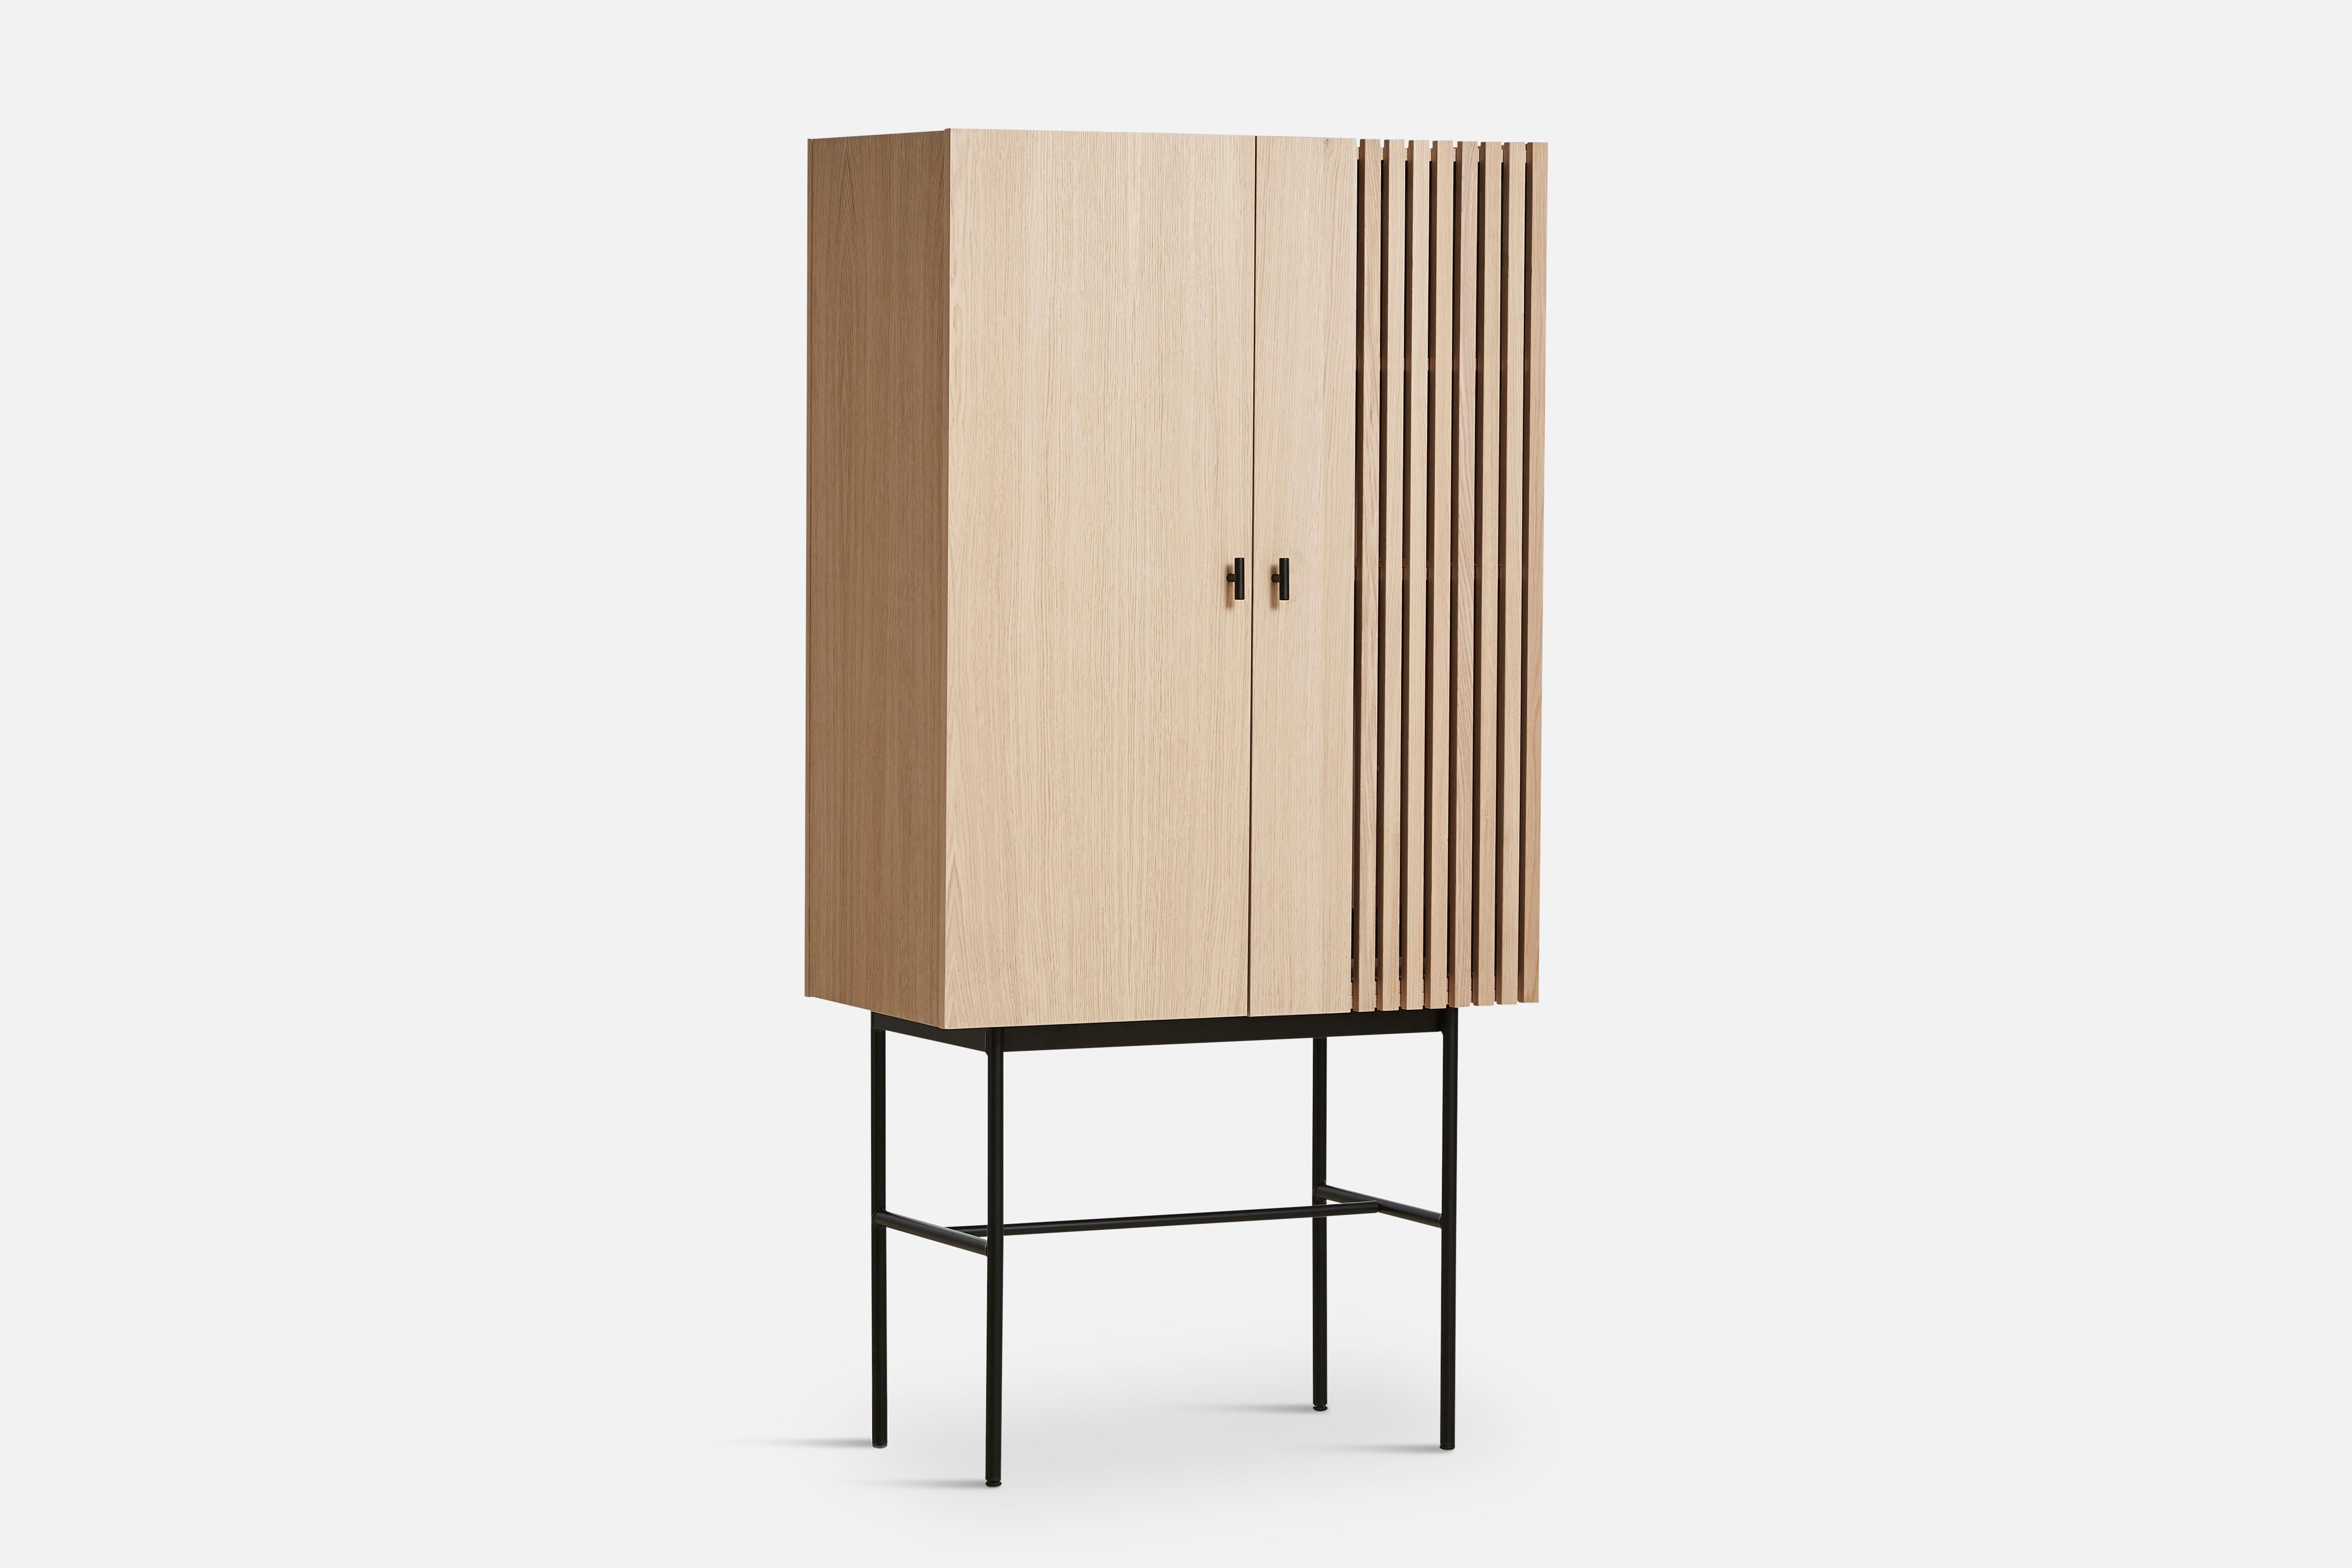 White oak array highboard 80 by Says Who
Materials: Oak, metal
Dimensions: D 44 x W 80 x H 160 cm
Also available in different colours and materials. 

The founders, Mia and Torben Koed, decided to put their 30 years of experience into a new